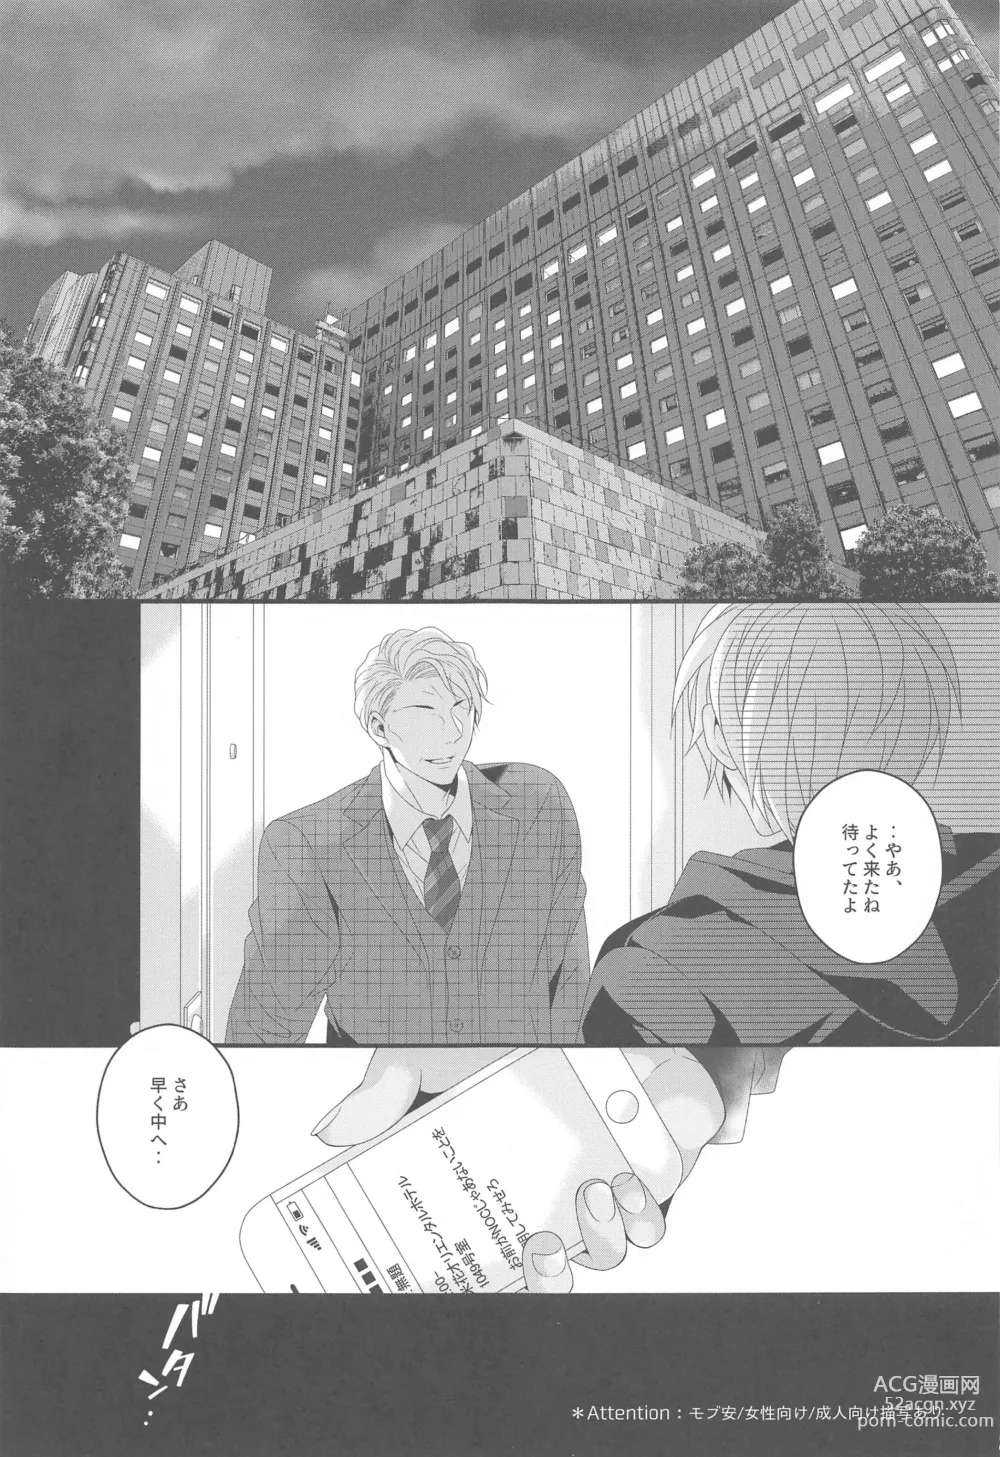 Page 2 of doujinshi Aibetsuriku no Yosame - A rainy night the pain of separation from loved ones